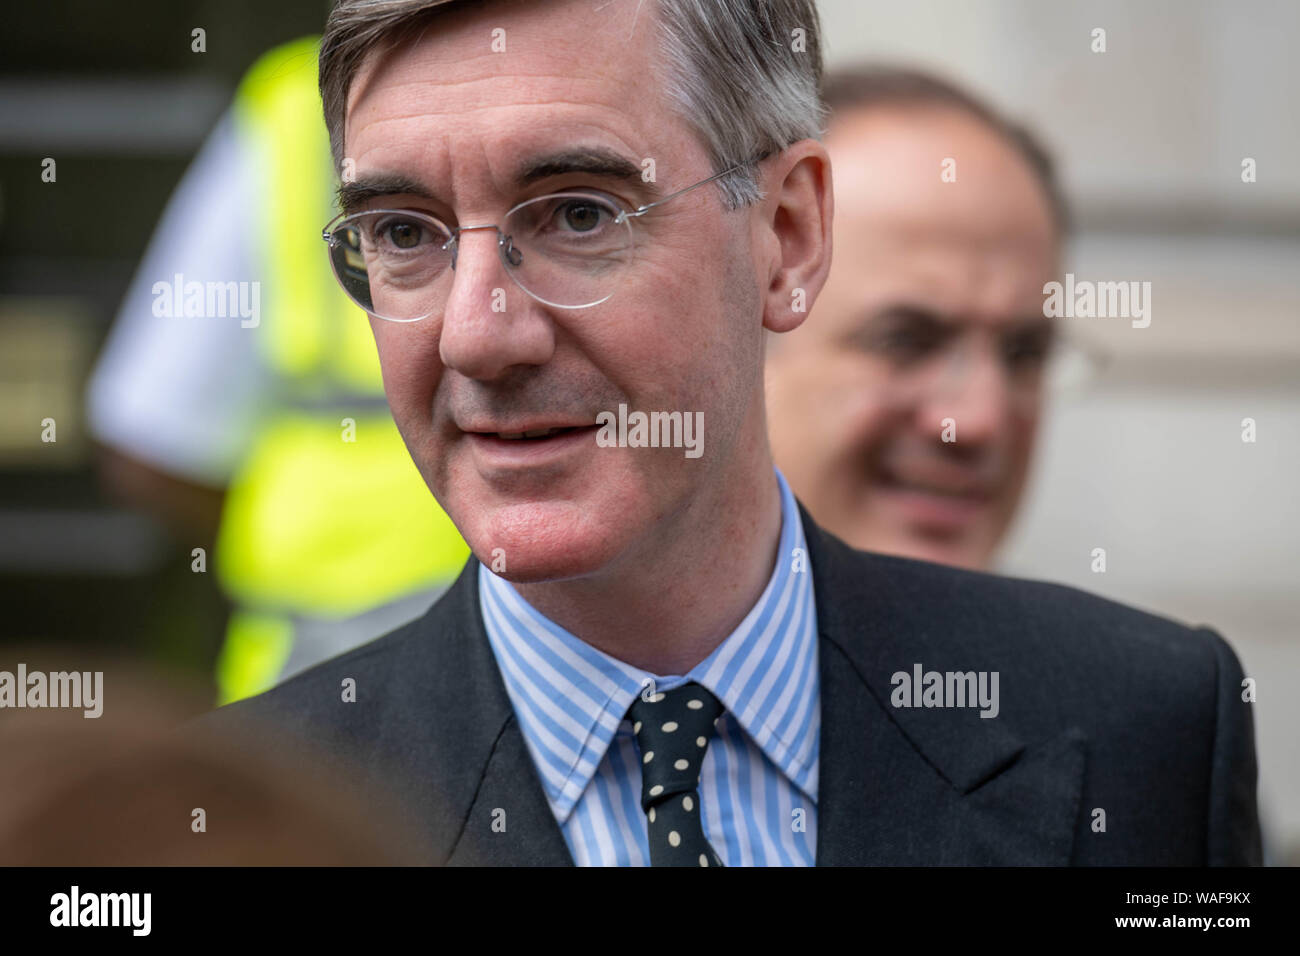 London 20th August 2019 Brexit Whitehall watch with Government Ministers leaving the cabinet office Jacob Rees-Mogg MP PC Leader of the House of Commons Credit Ian DavidsonAlamy Live News Stock Photo